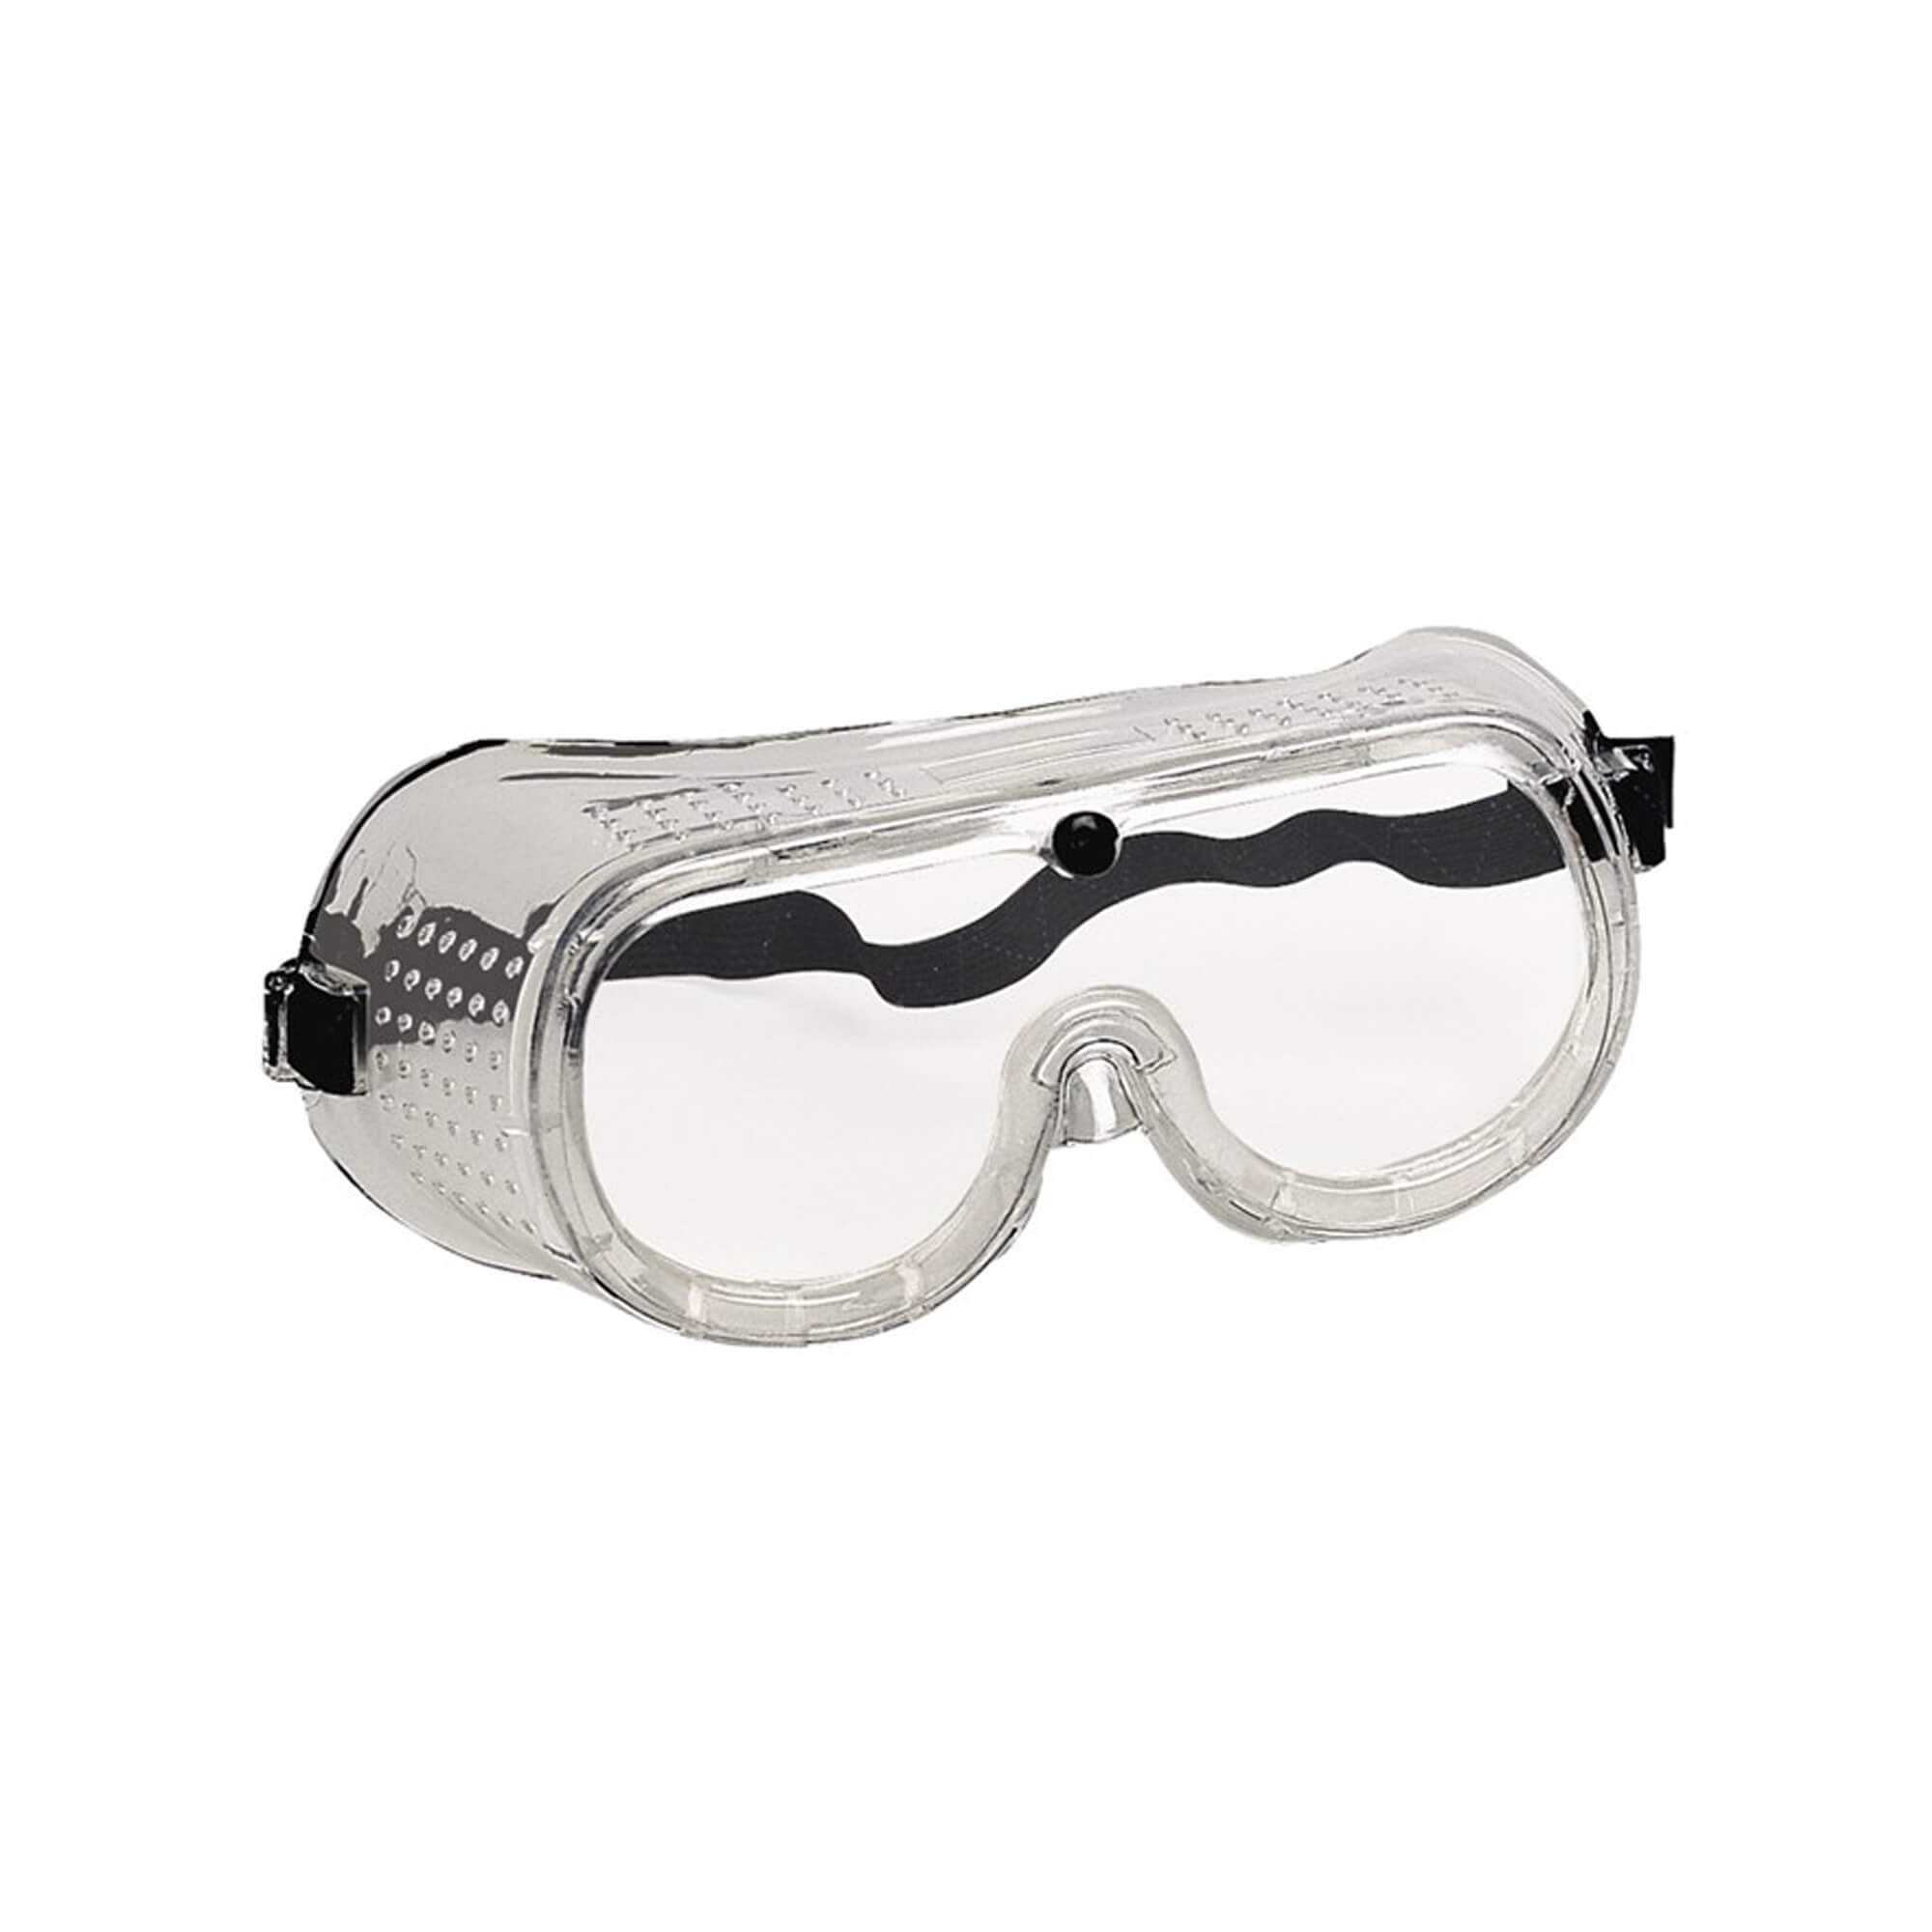 Monolux Safety Glasses